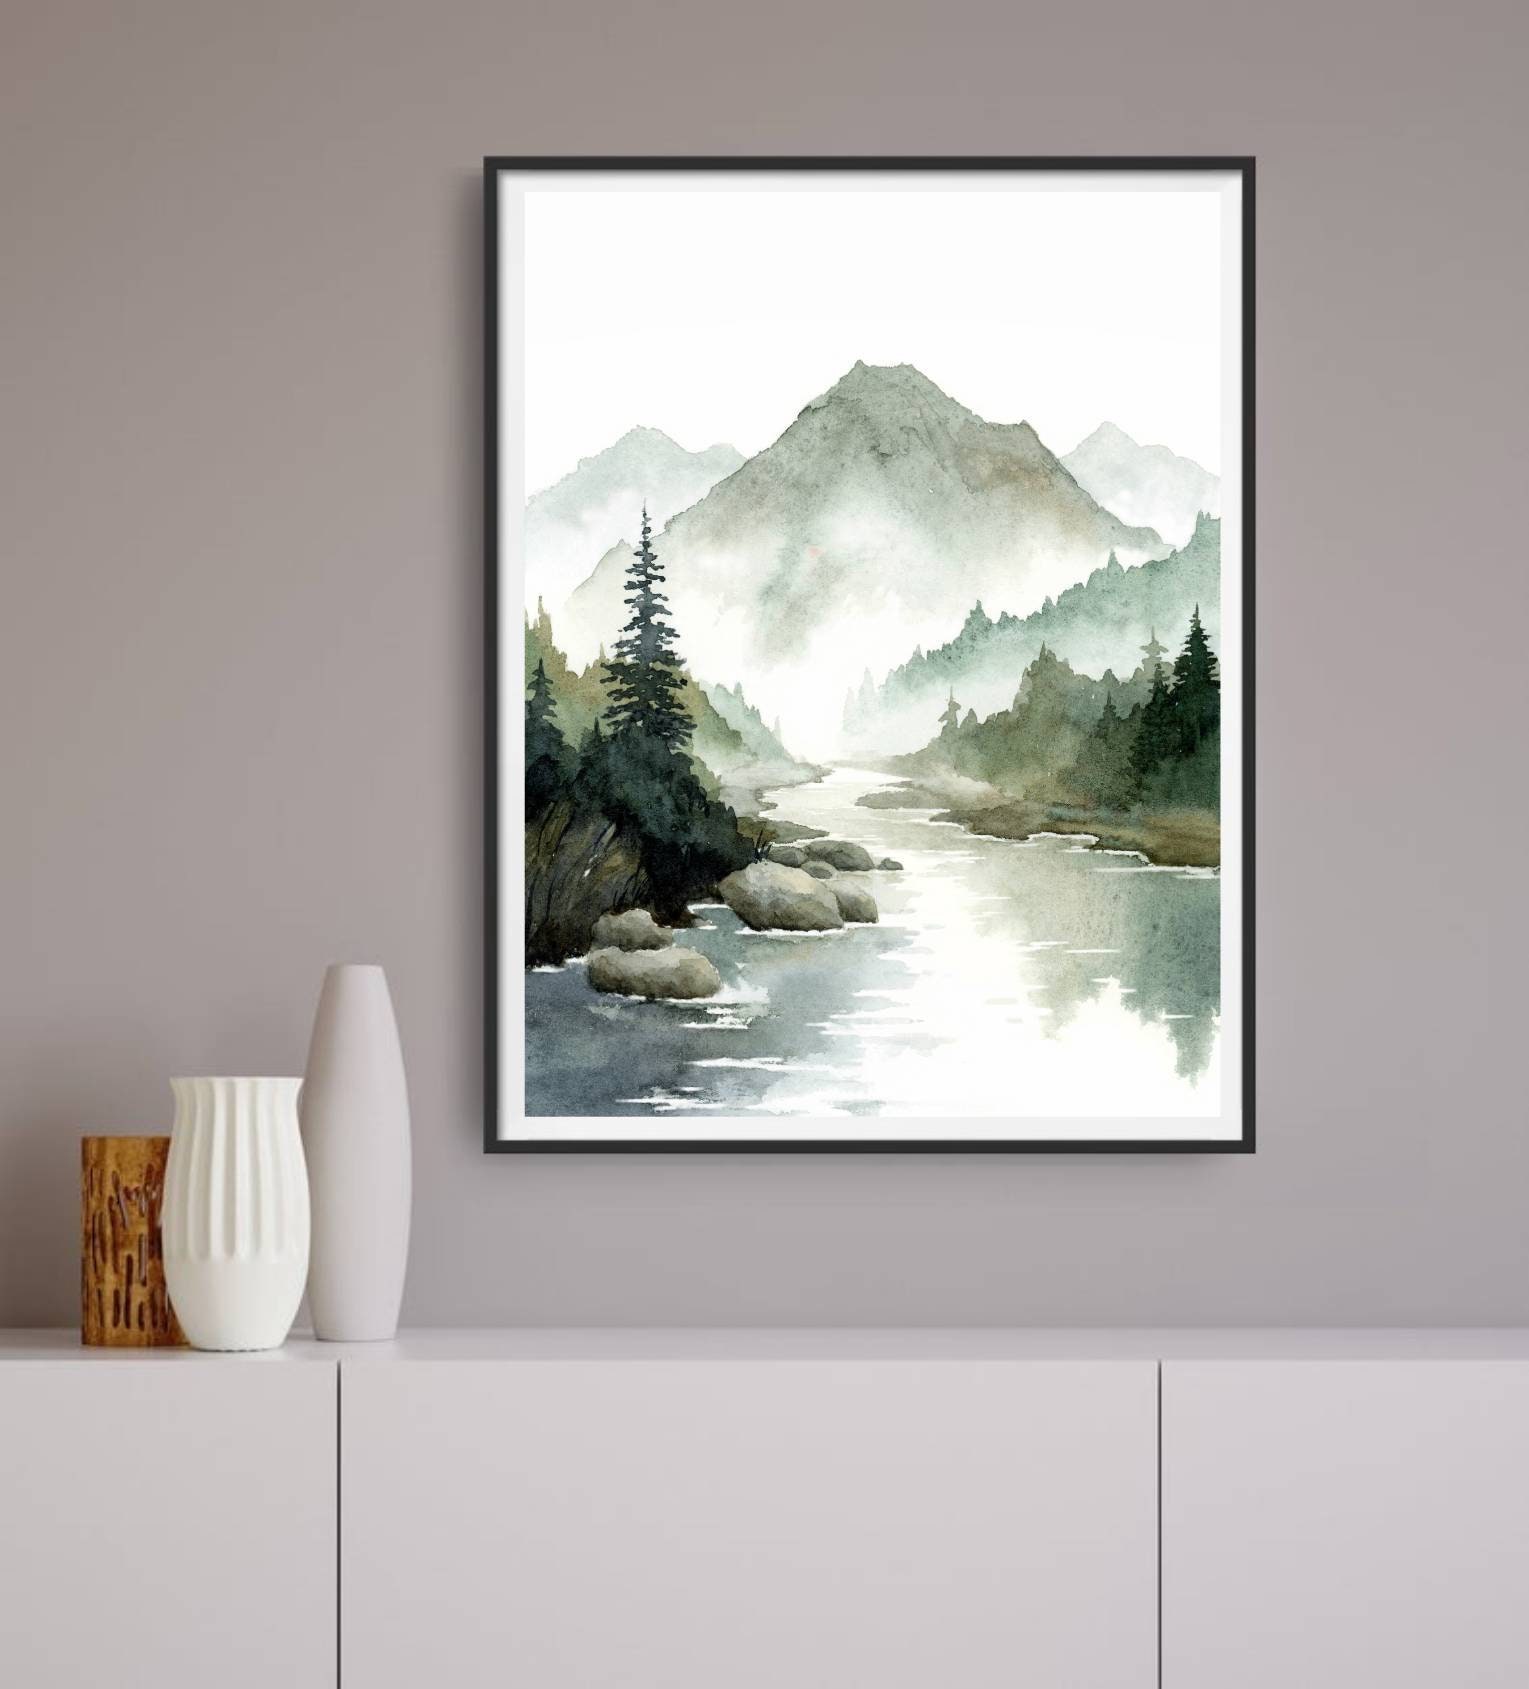 IDEA4WALL Emerald Lake Besides The Forest And Mountains Under The Cloudy  Sky On Canvas 3 Pieces Print & Reviews